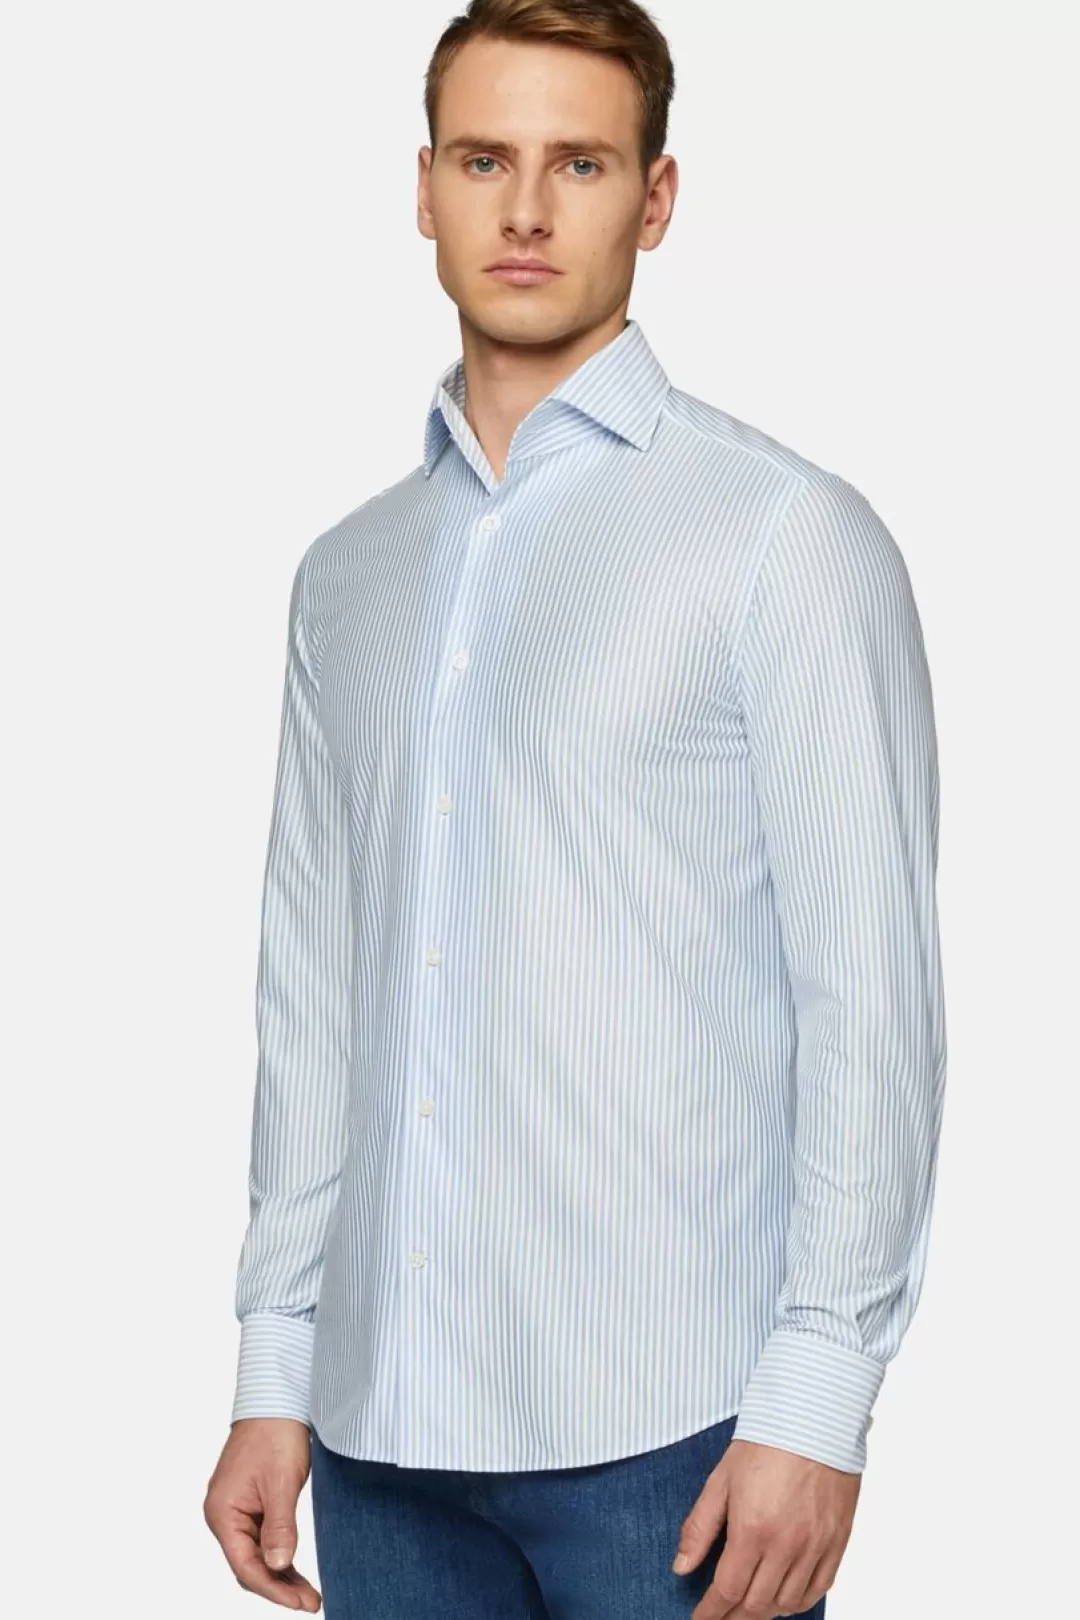 Boggi Polo Camicia In Jersey Giapponese Regular Fit Bianco Store